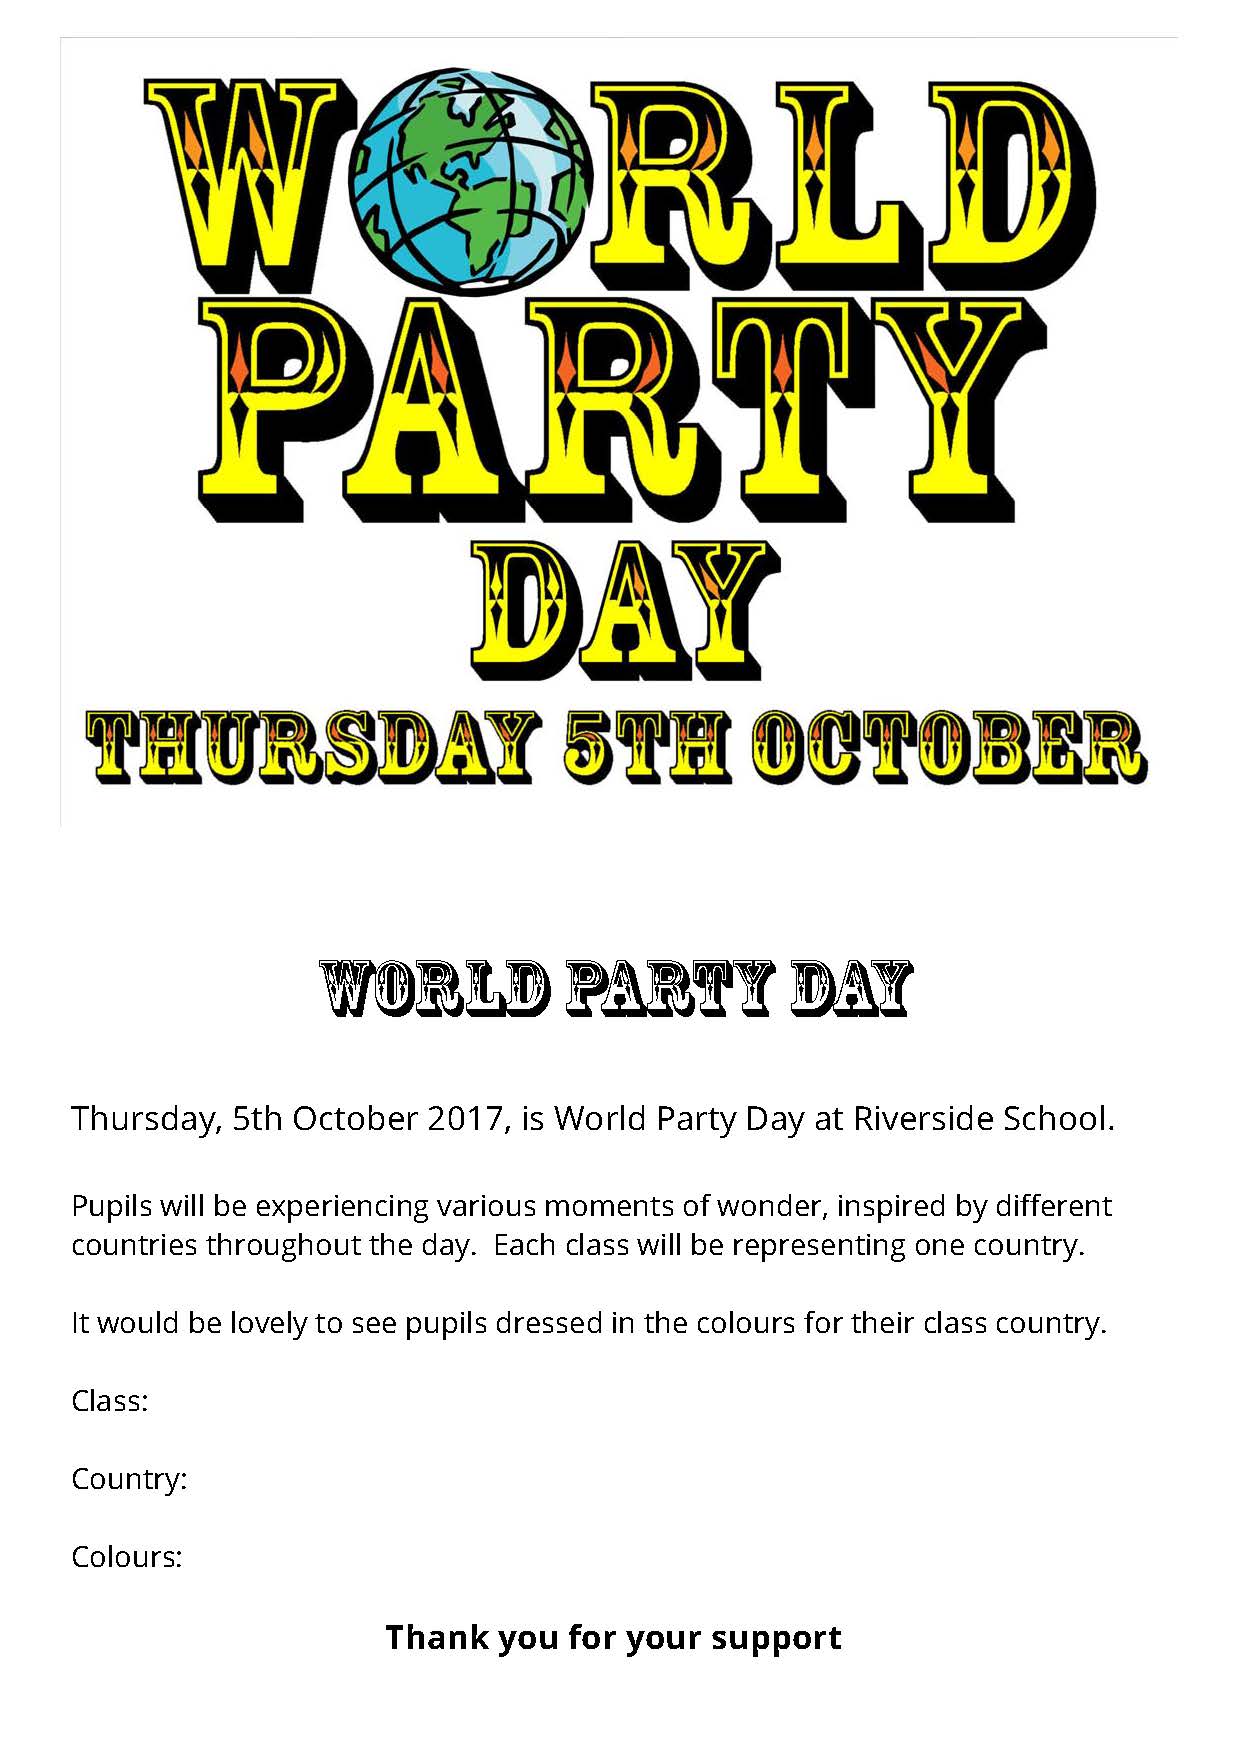 World Party Day ecard